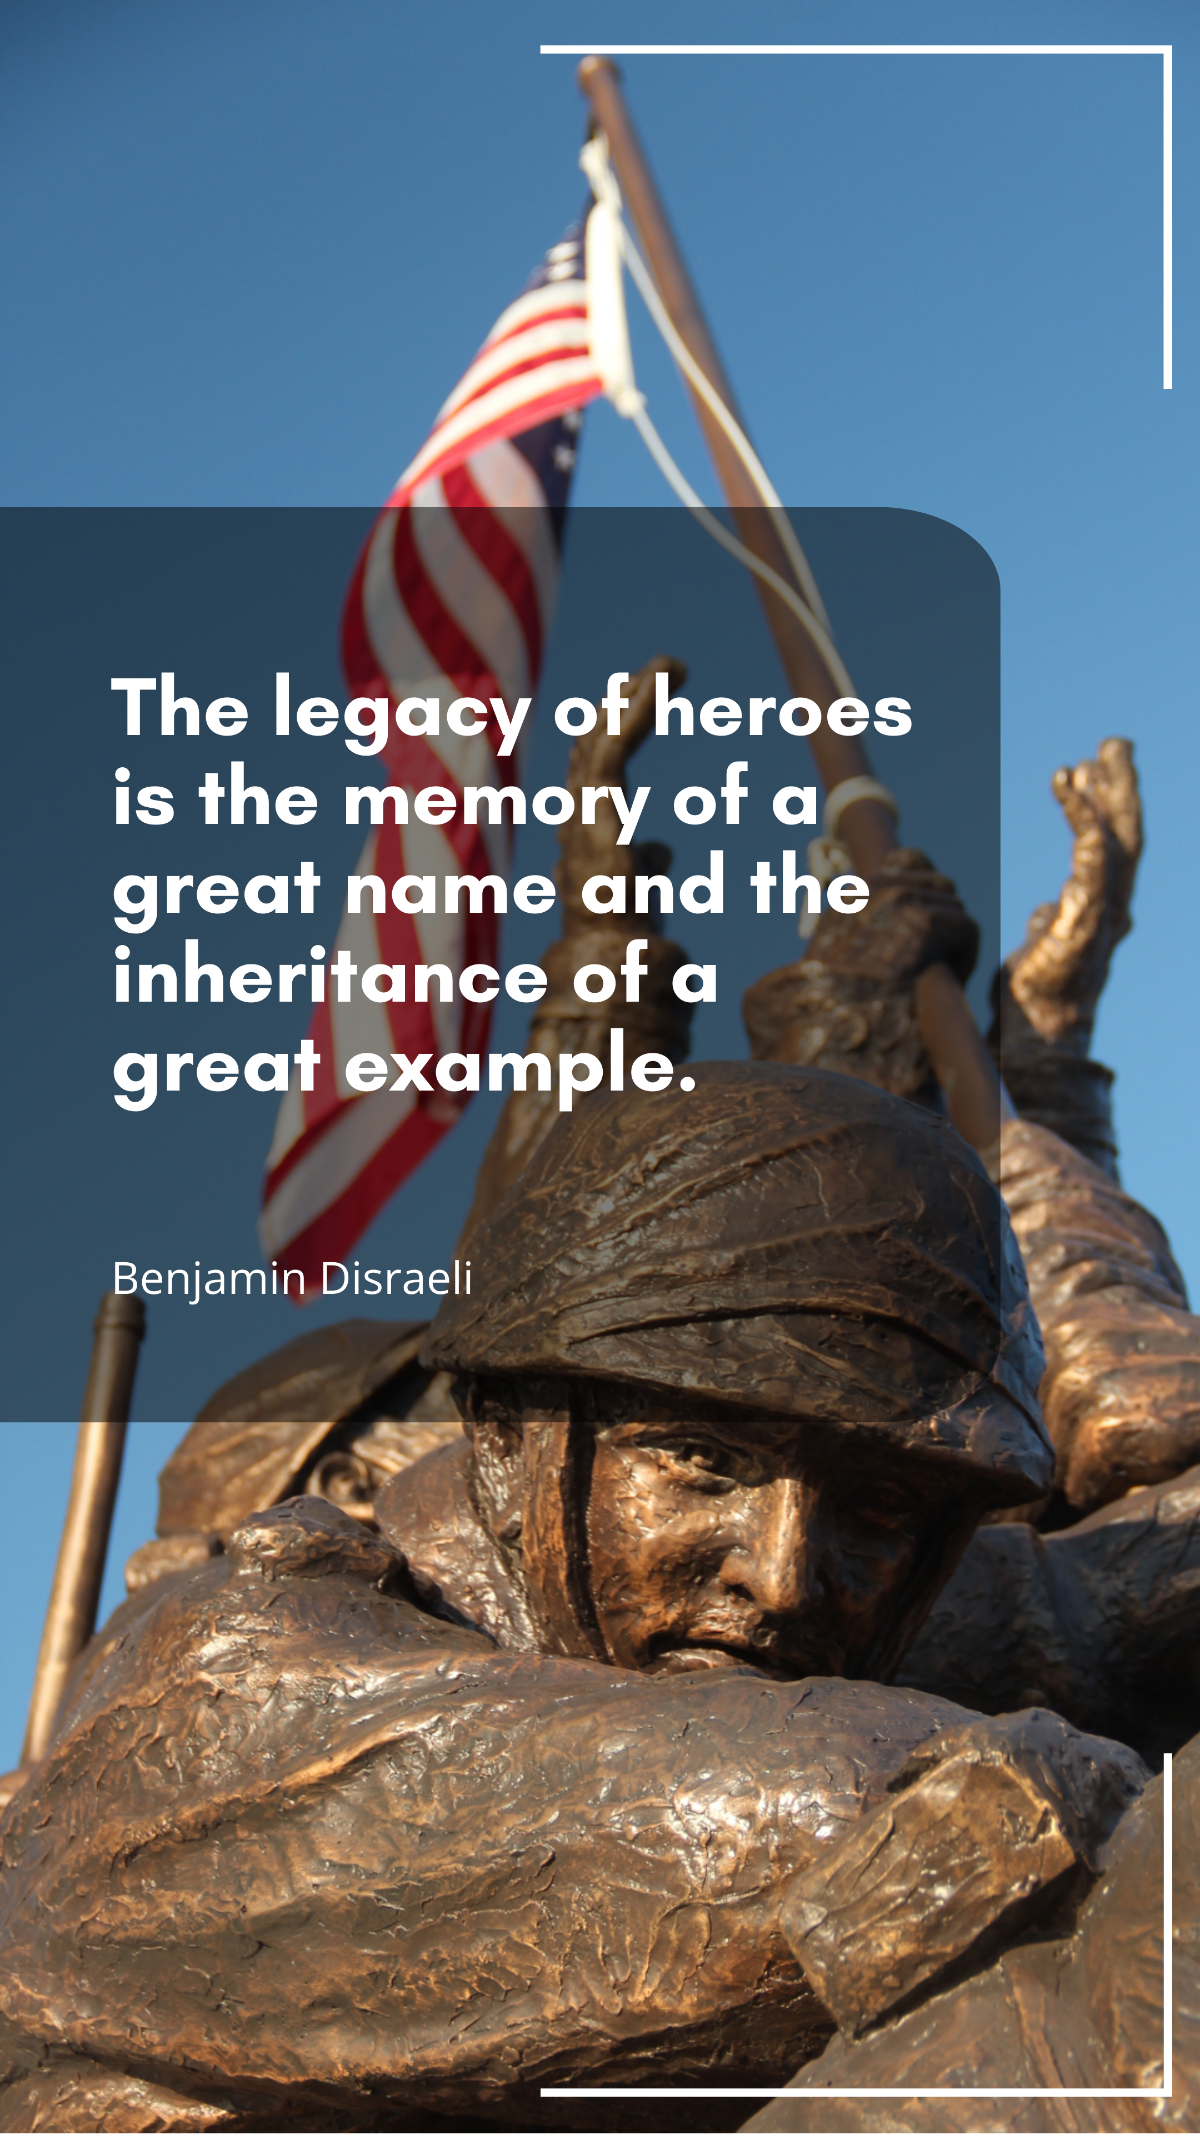 Free Benjamin Disraeli - The legacy of heroes is the memory of a great name and the inheritance of a great example. Template